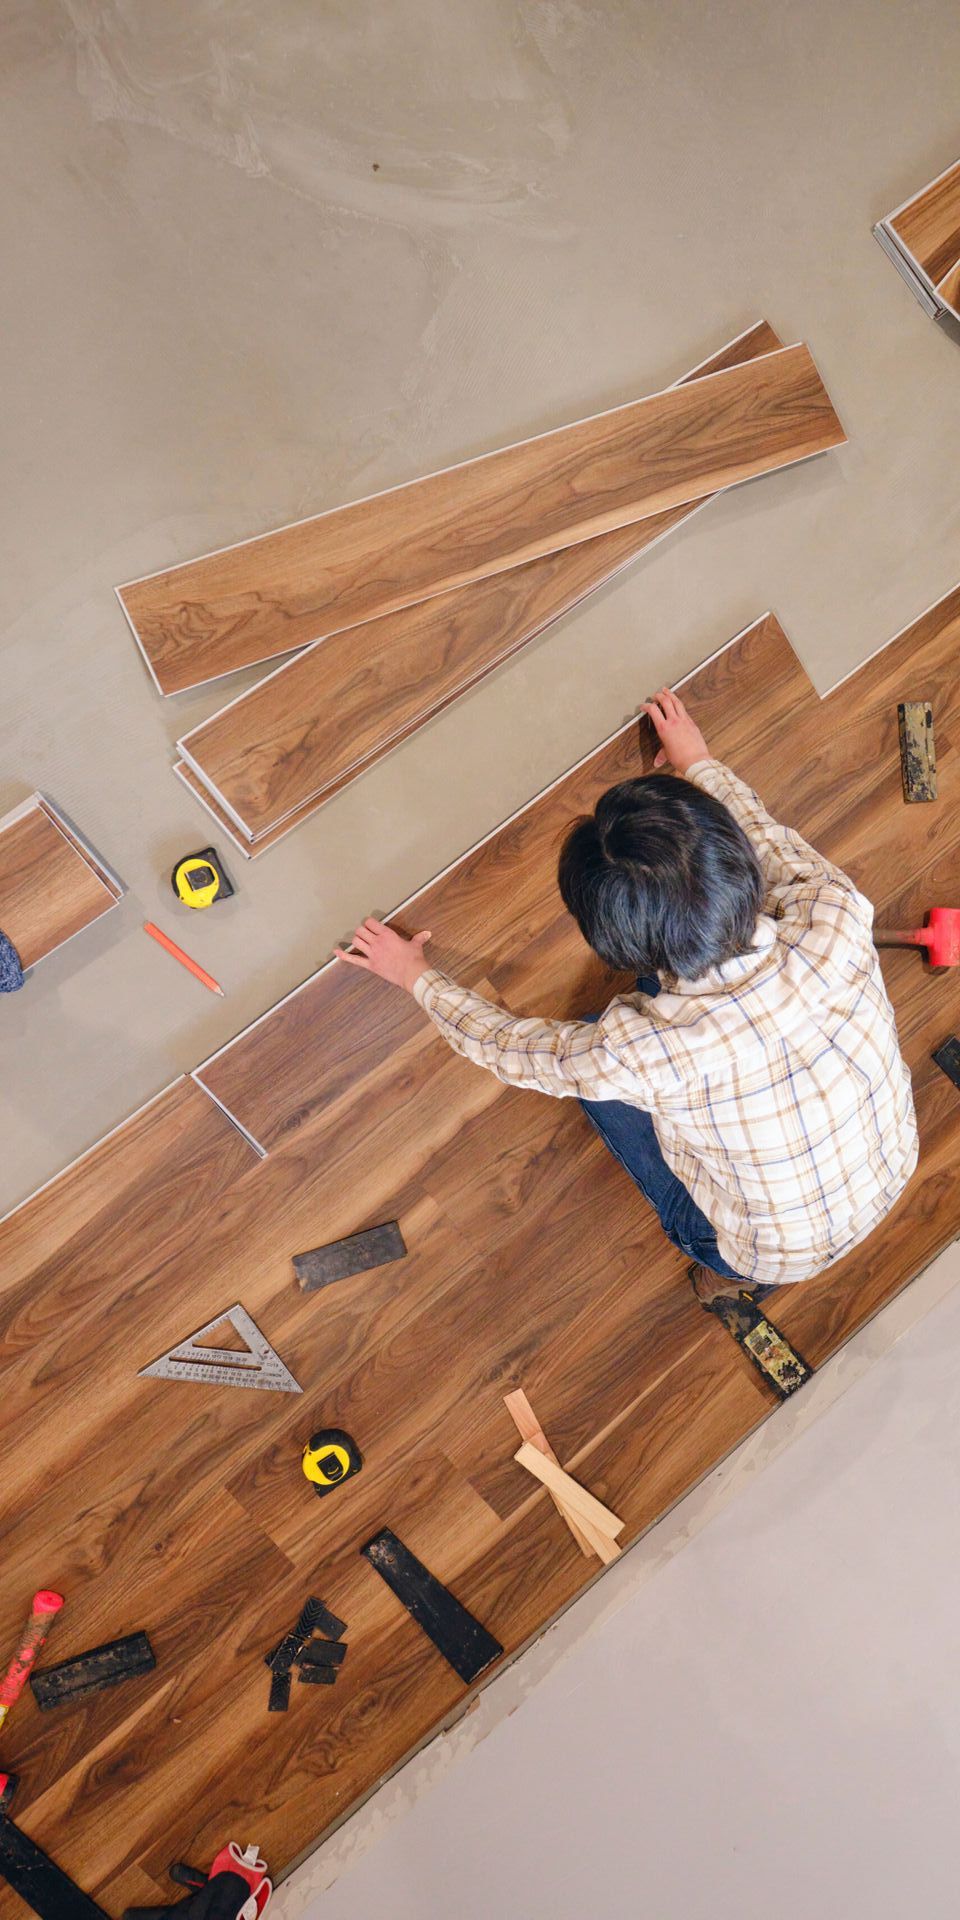 a man is sitting on the floor installing a wooden floor .